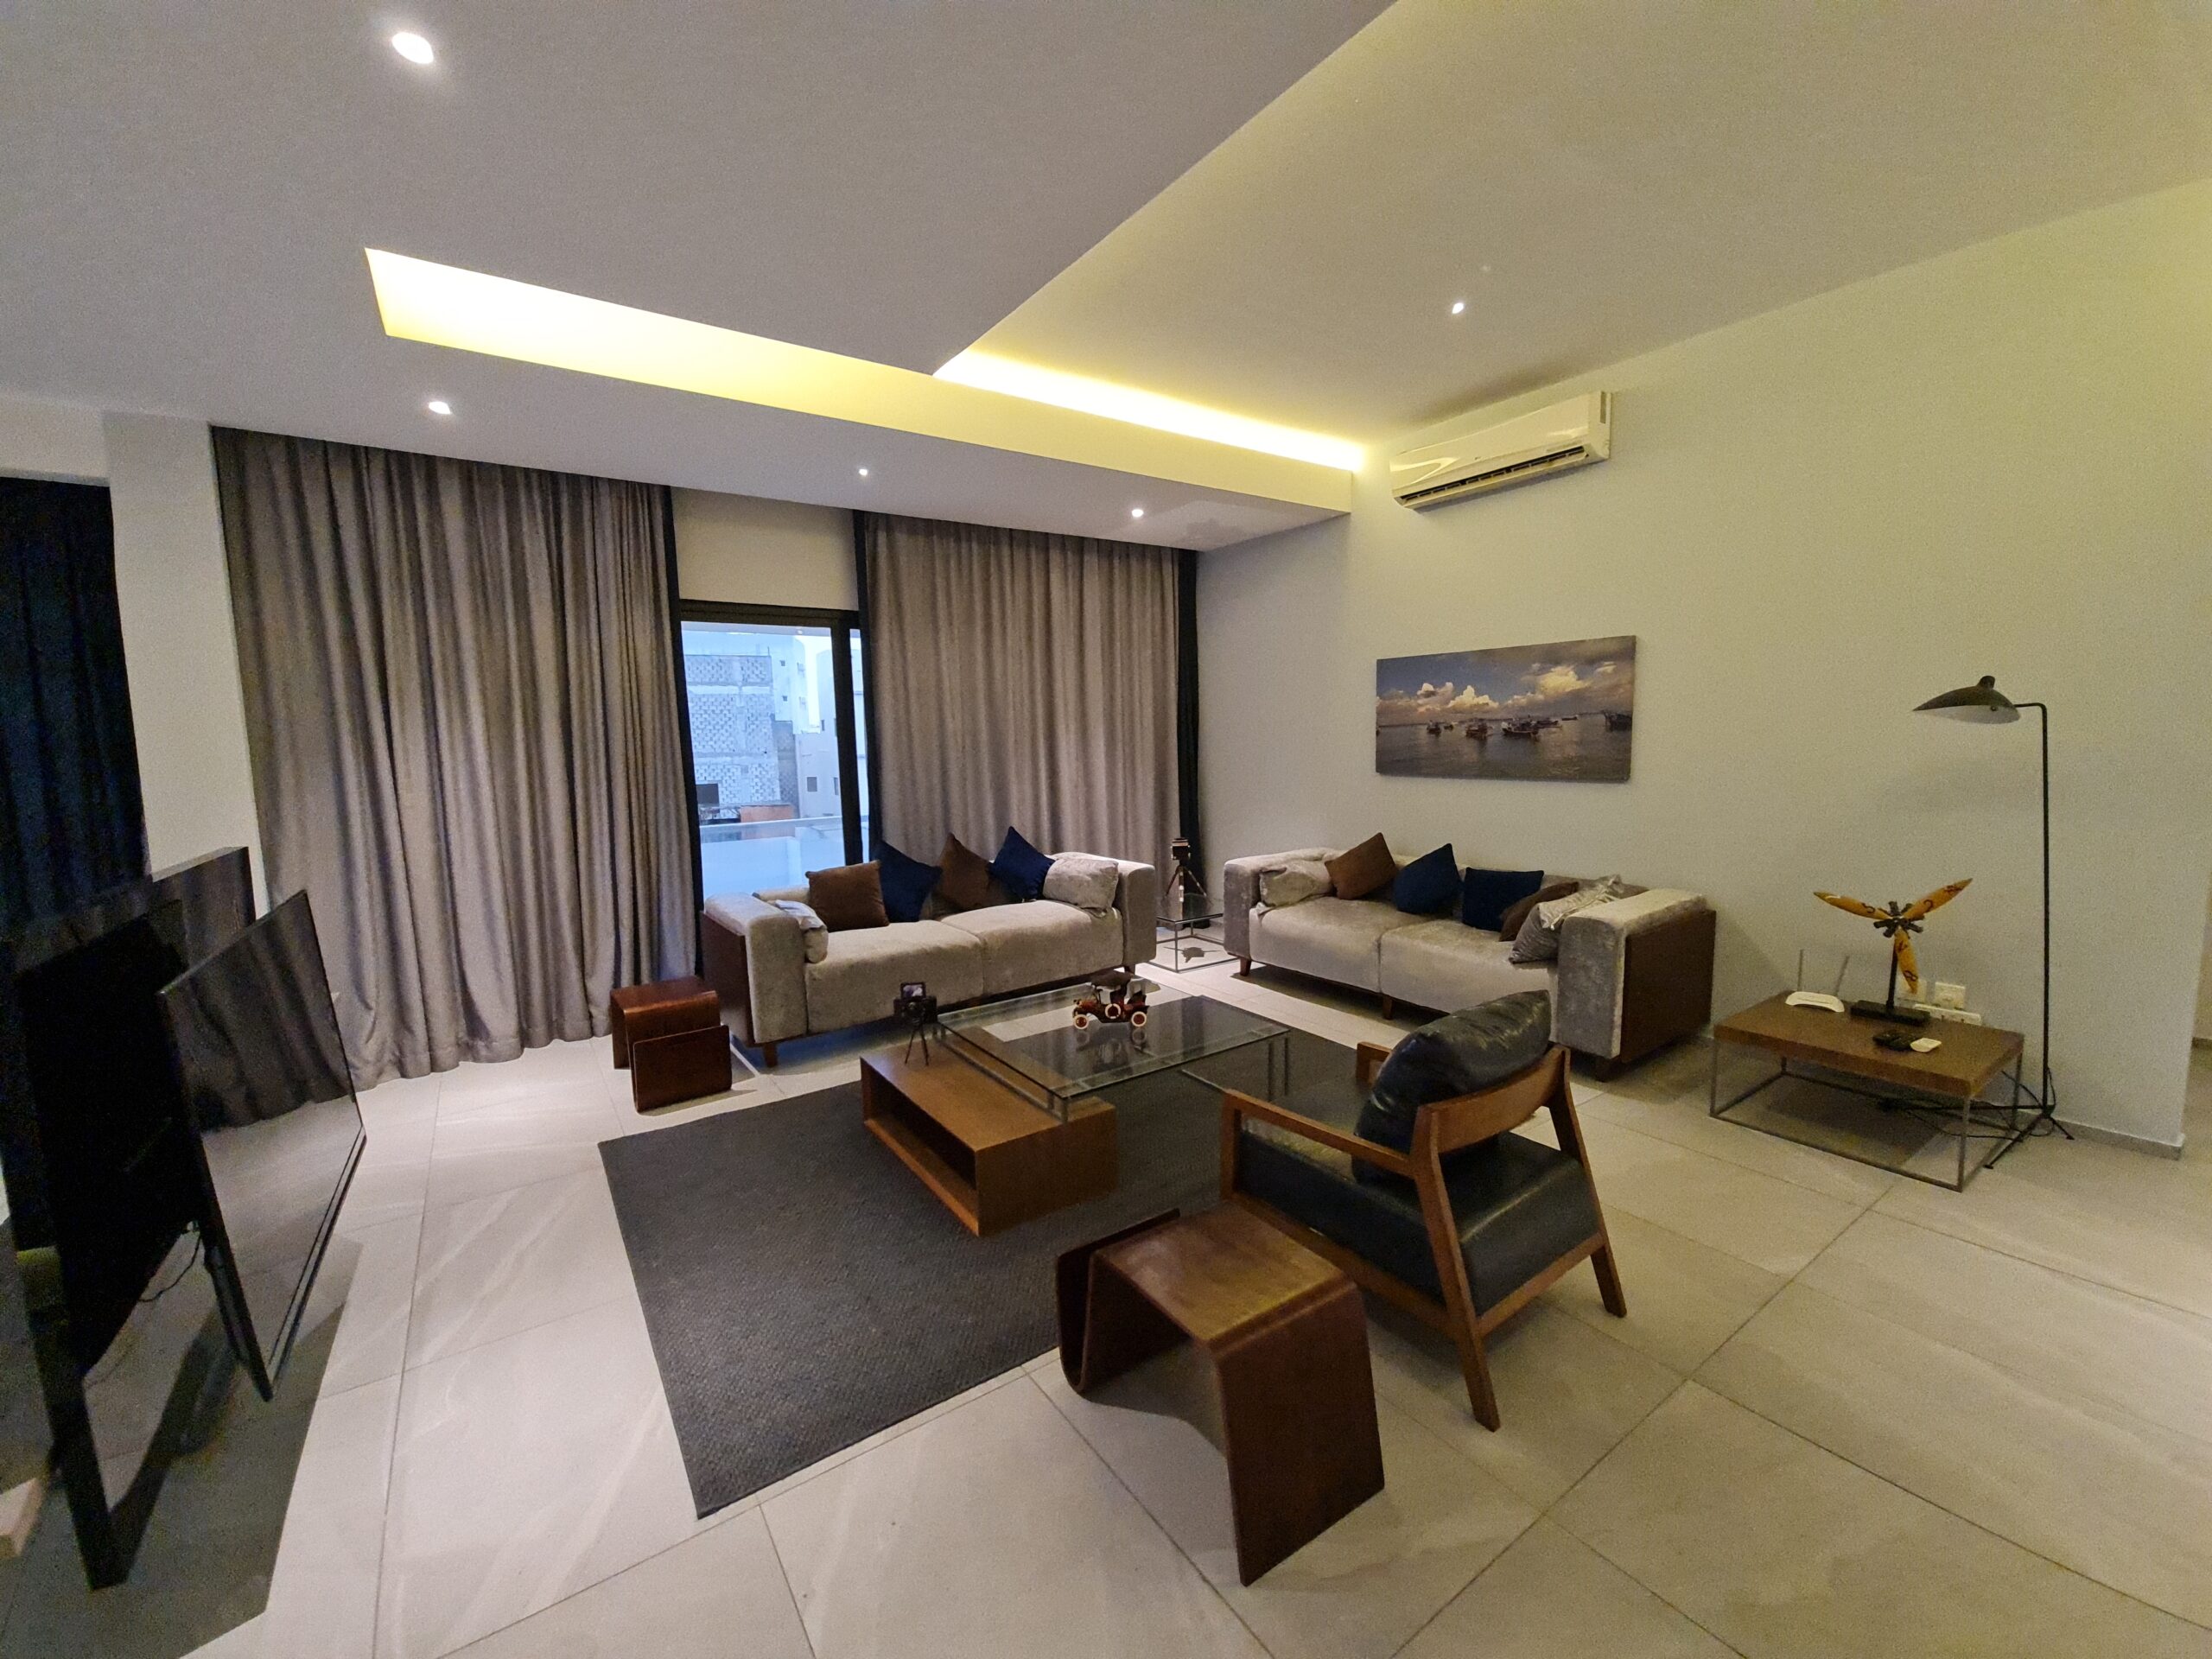 Luxury apartment for rent with two bedrooms located in Janabiyah town